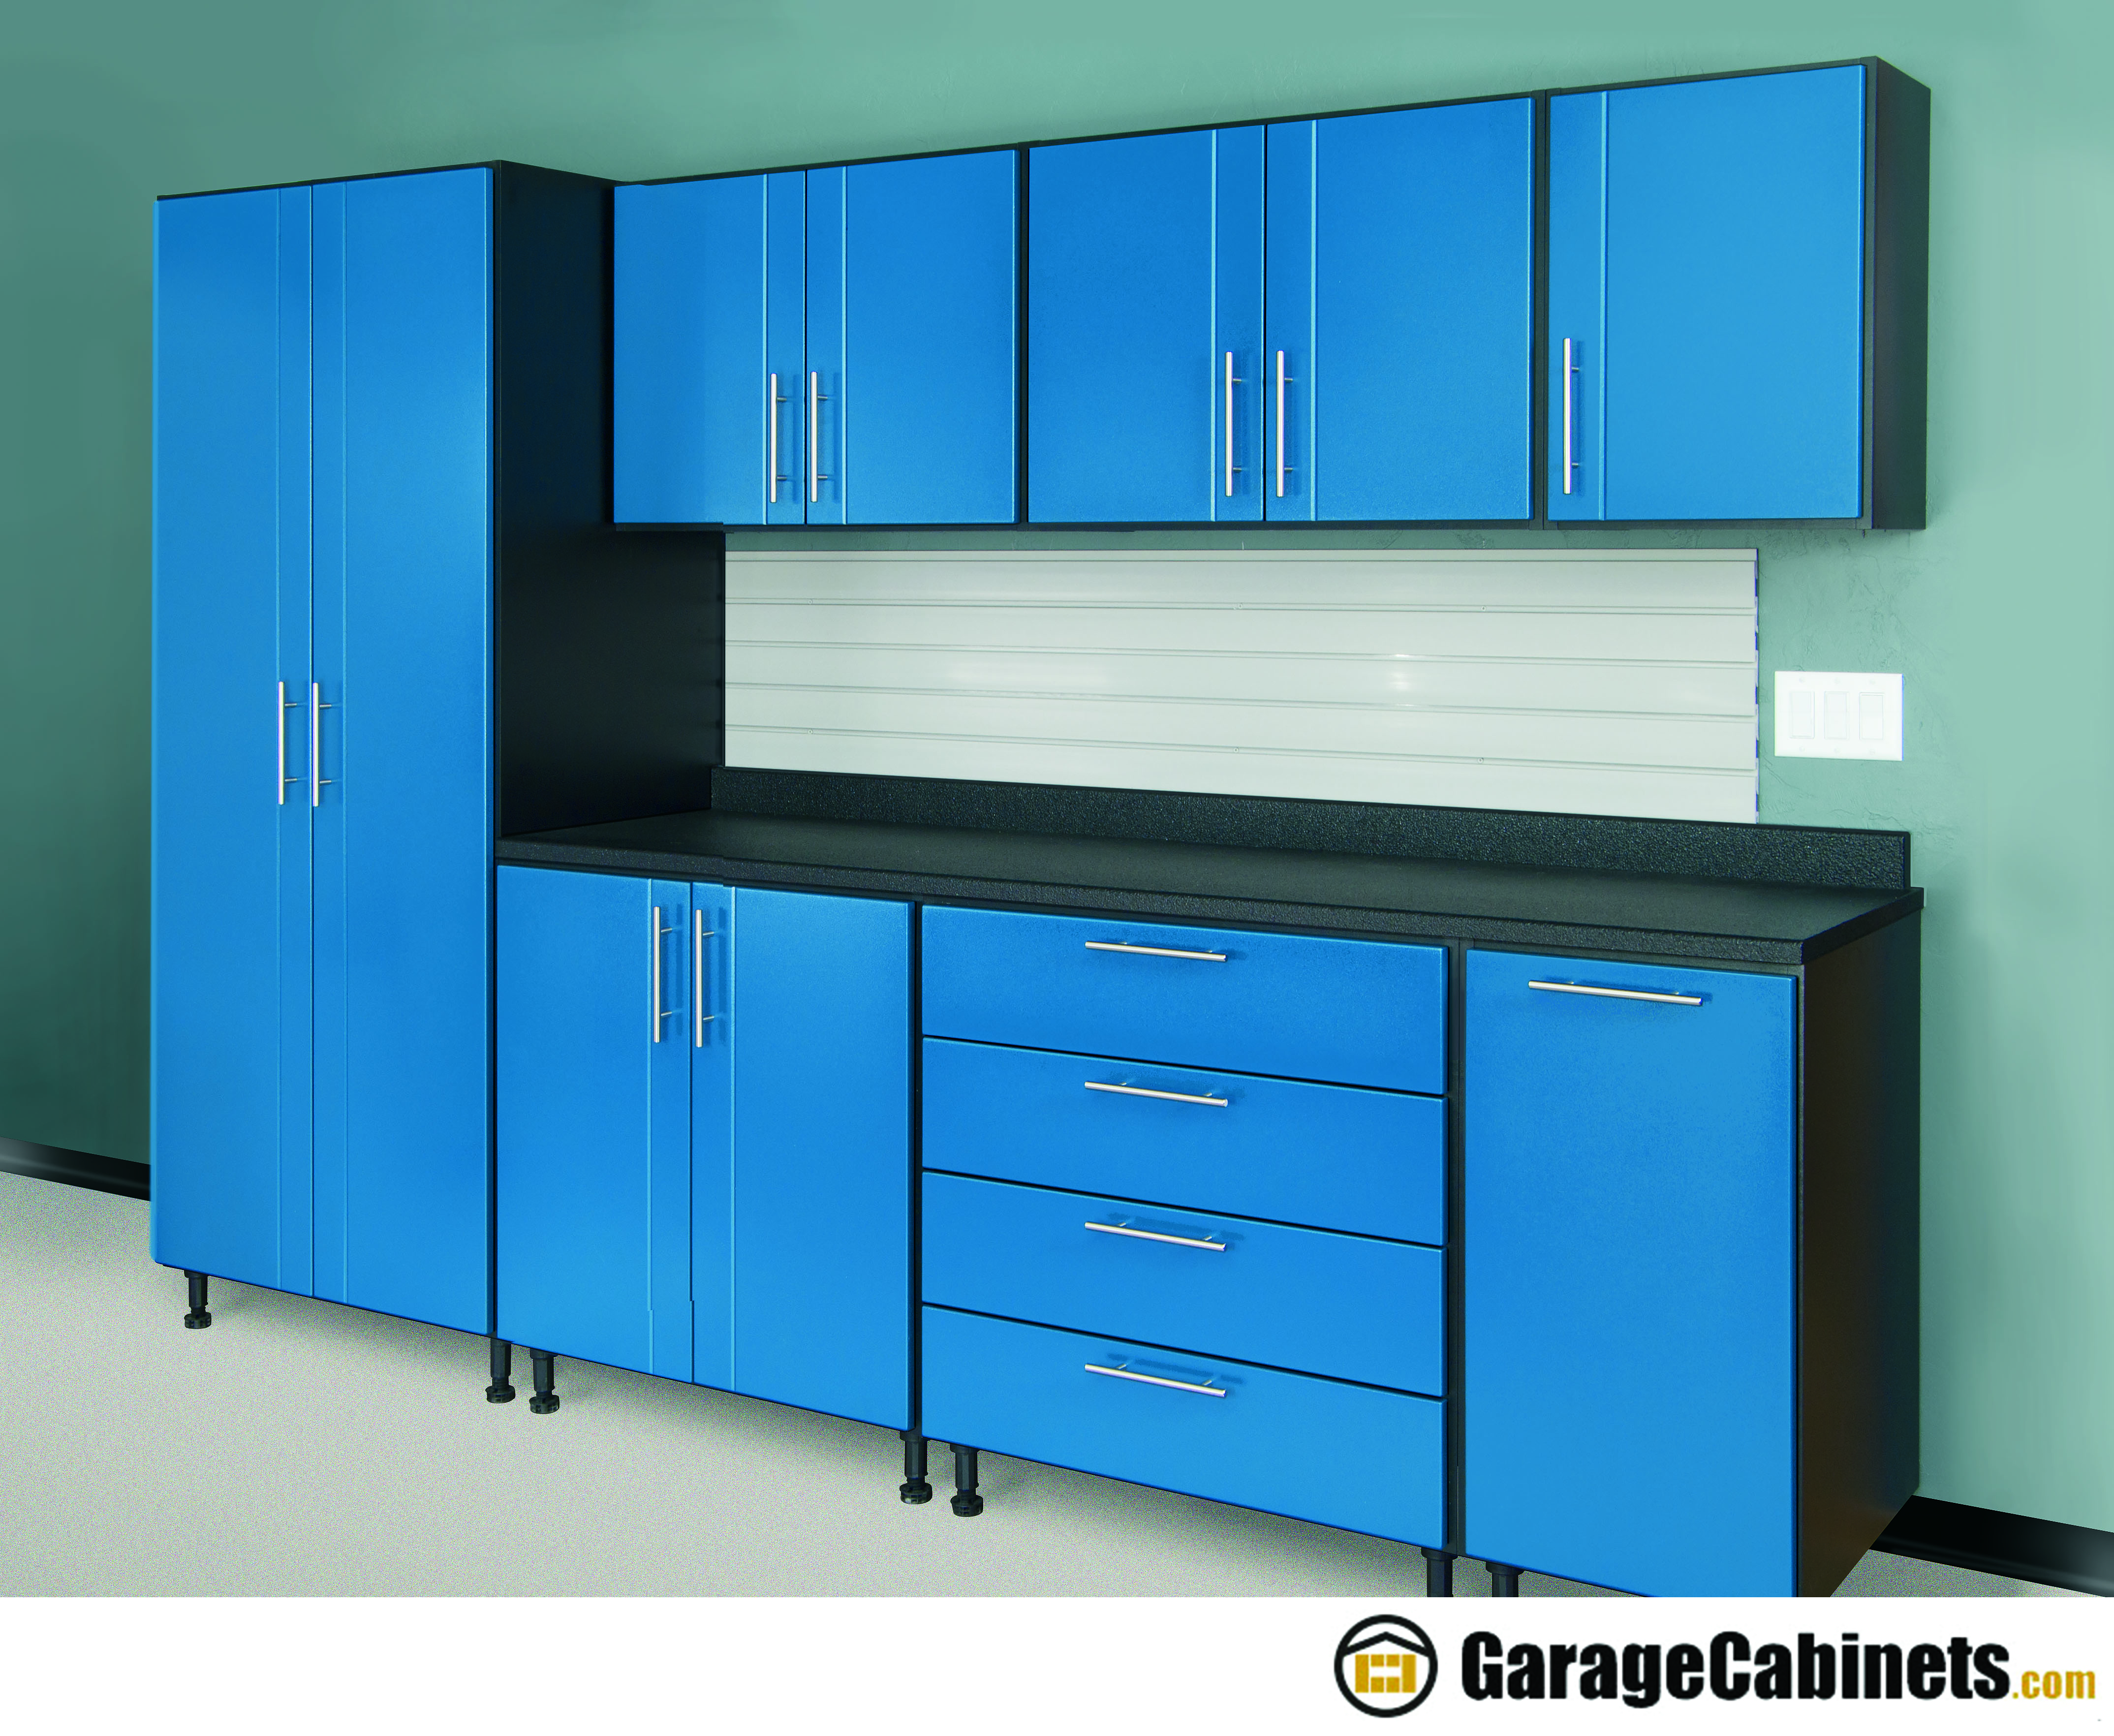 Read more about the article Wood garage storage cabinets- the quickest and easiest way to get high quality garage cabinets